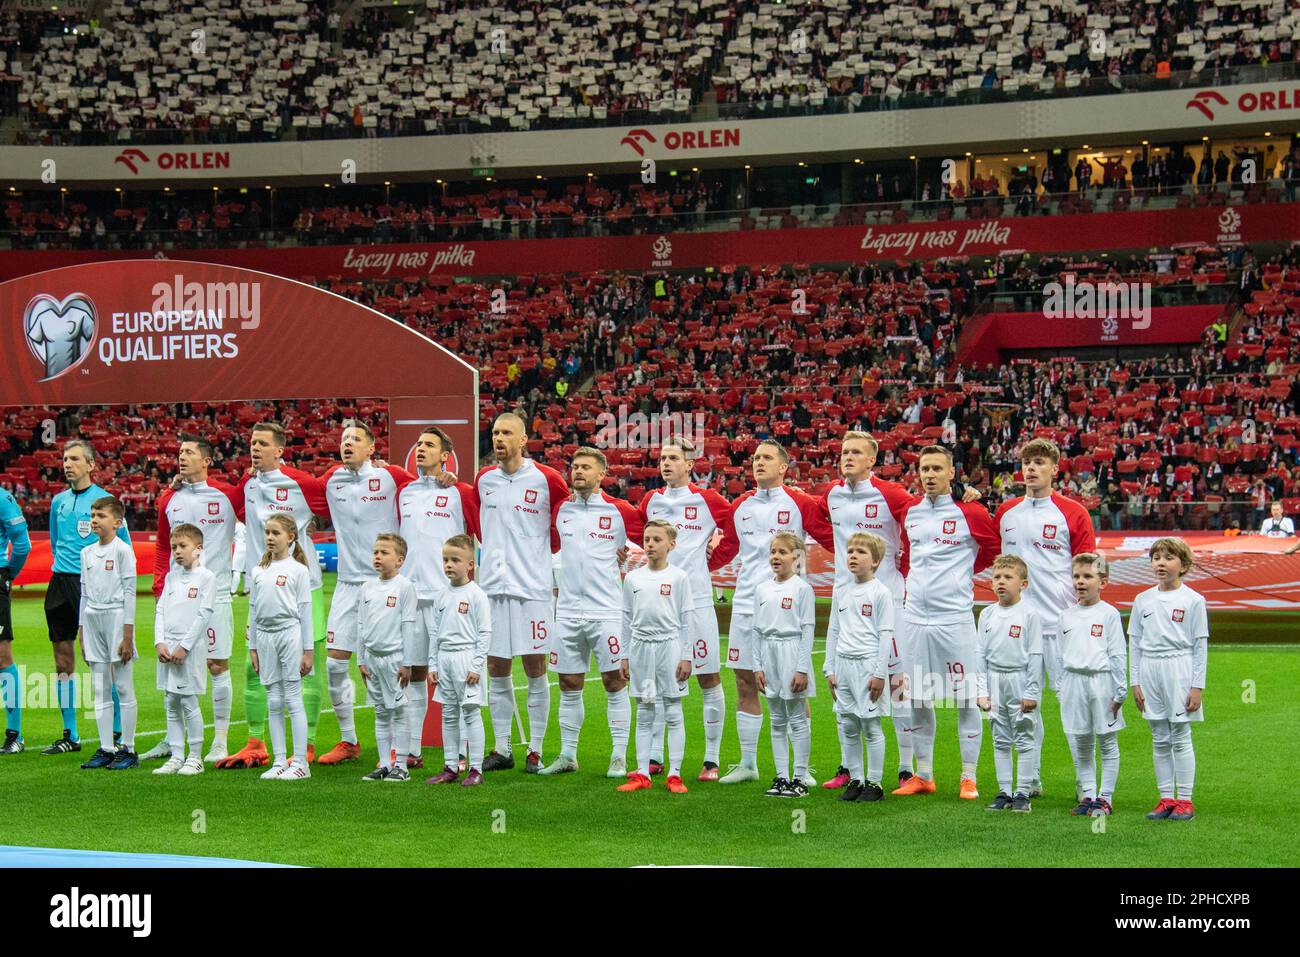 Warsaw Poland 27th Mar 2023 The Polish National Football Team During The Uefa European Championship 2024 Qualifying Round Group E Match Between Poland And Albania At Pge National Stadium In Warsaw Poland On March 27 2023 Photo By Andrew Surma Credit Sipa Usalamy Live News 2PHCXPB 